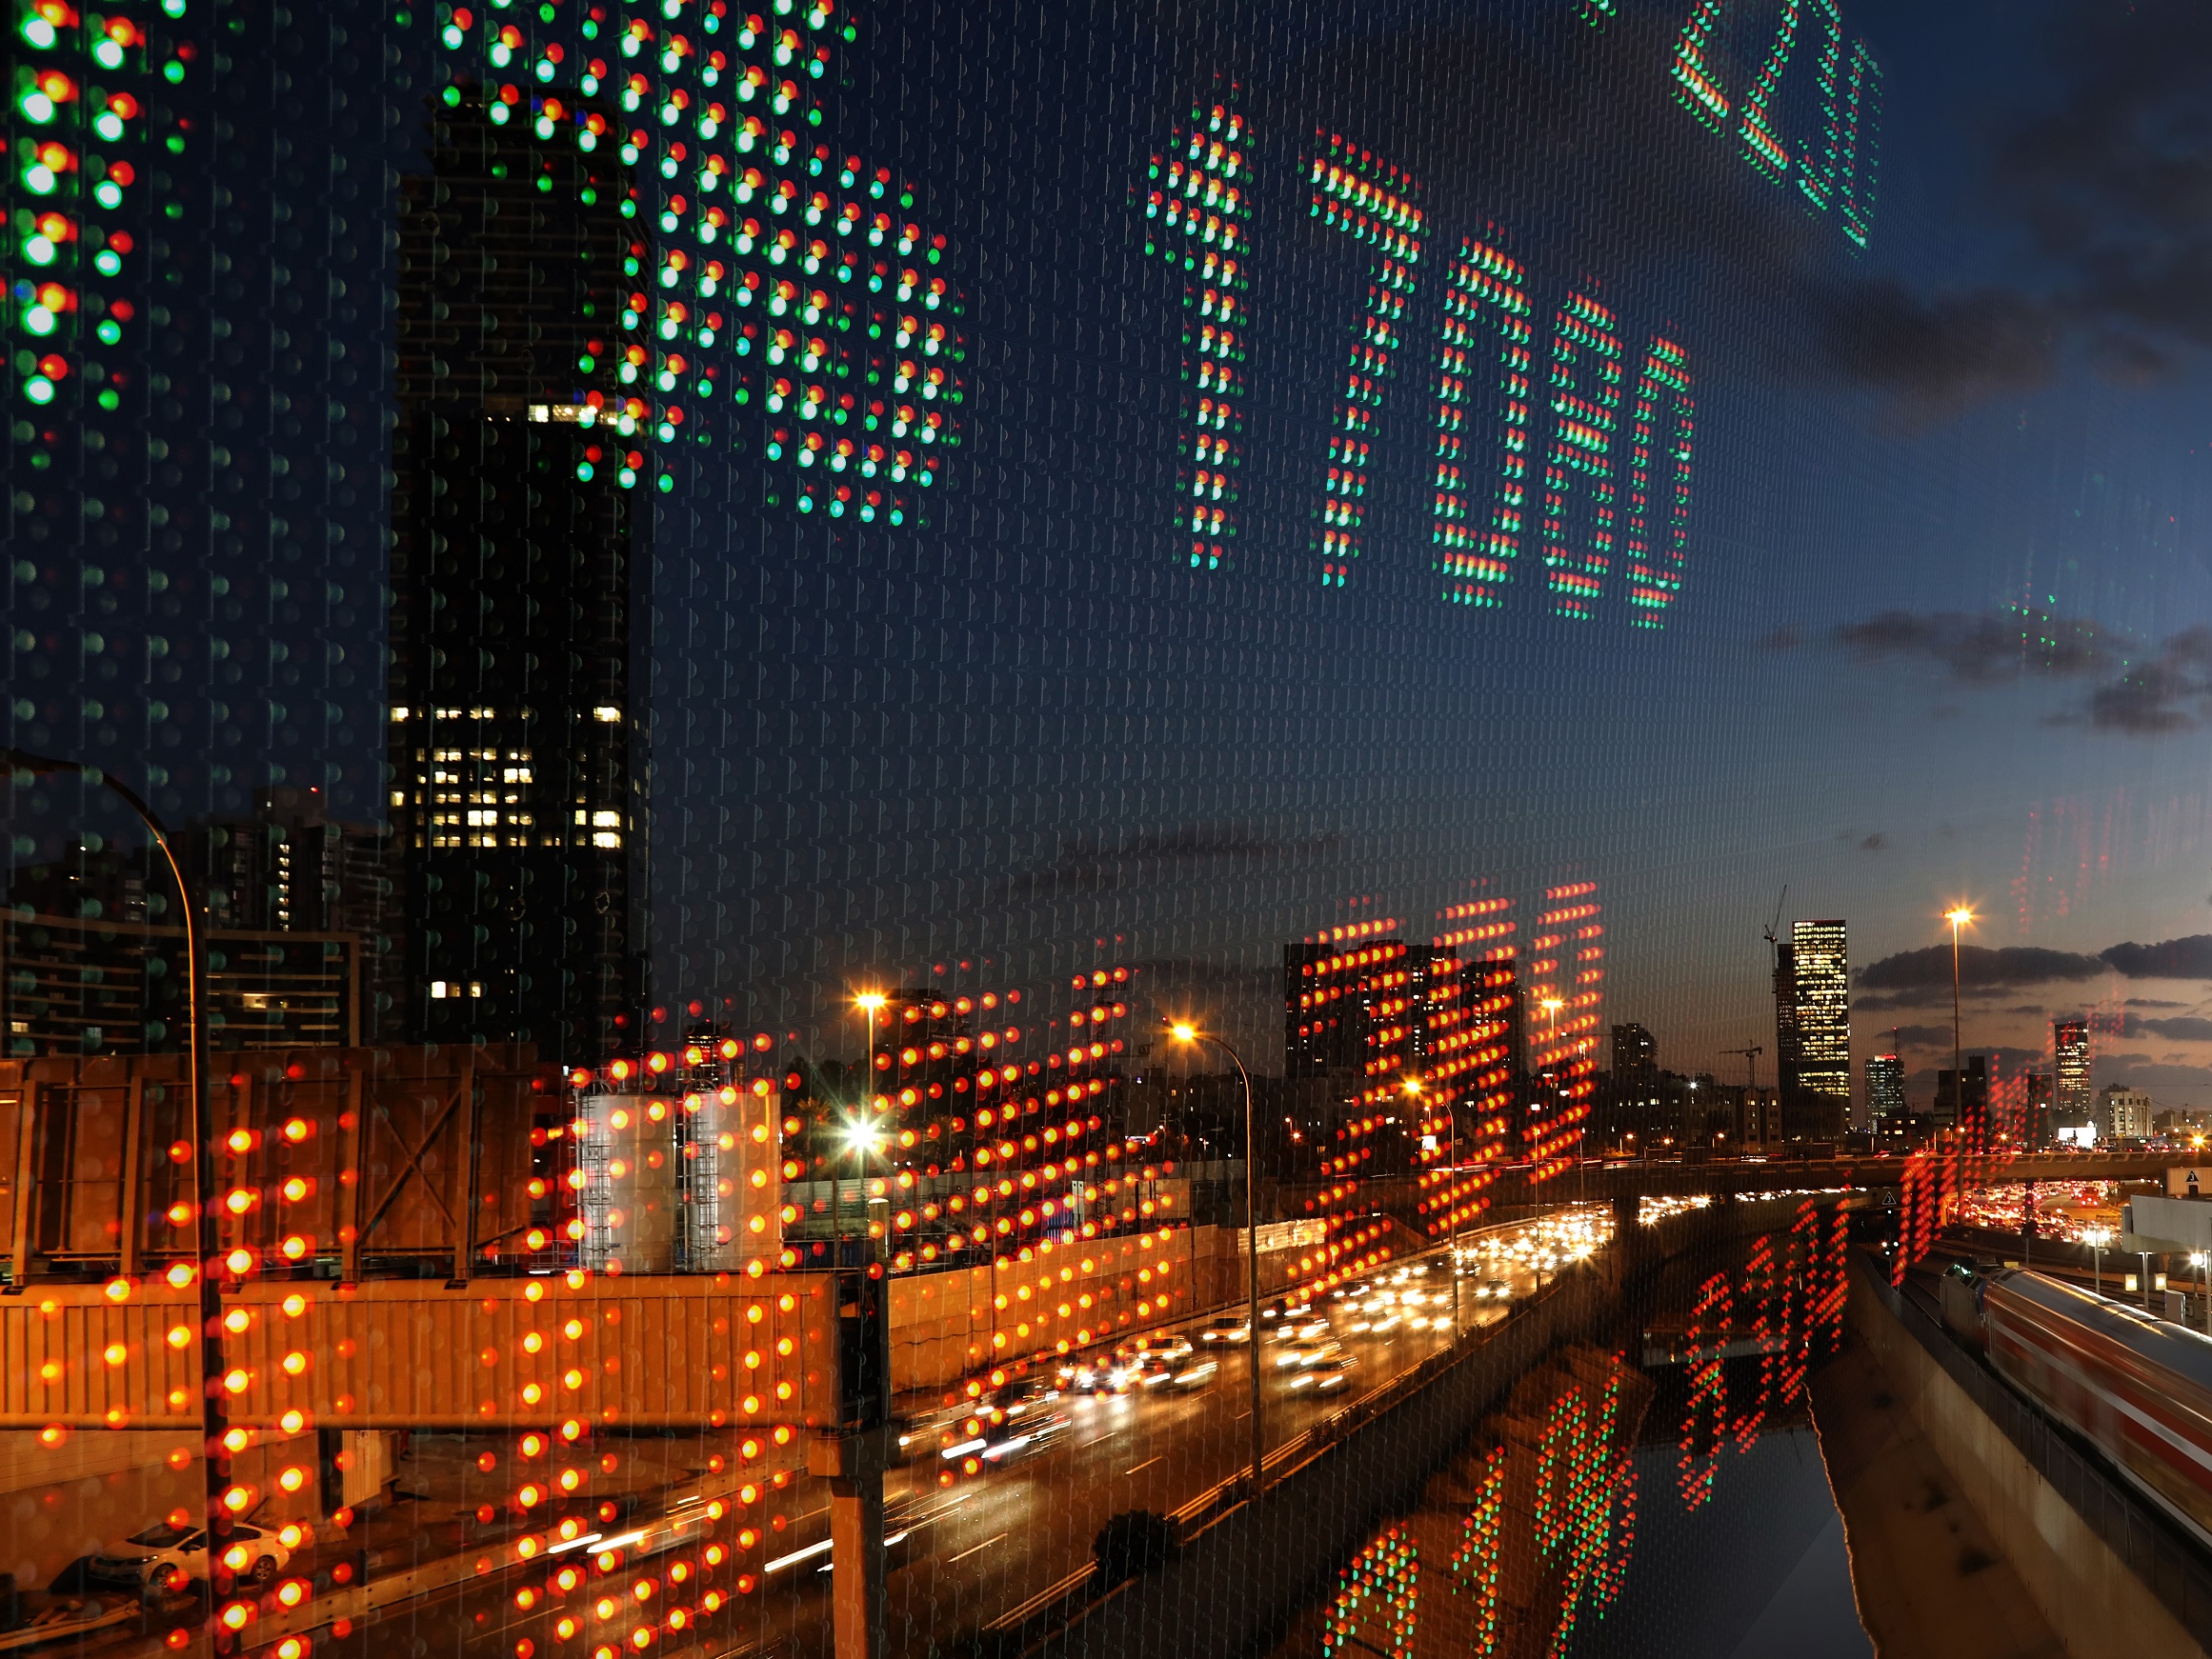 Numbers on digital screen with lit up city at night in background